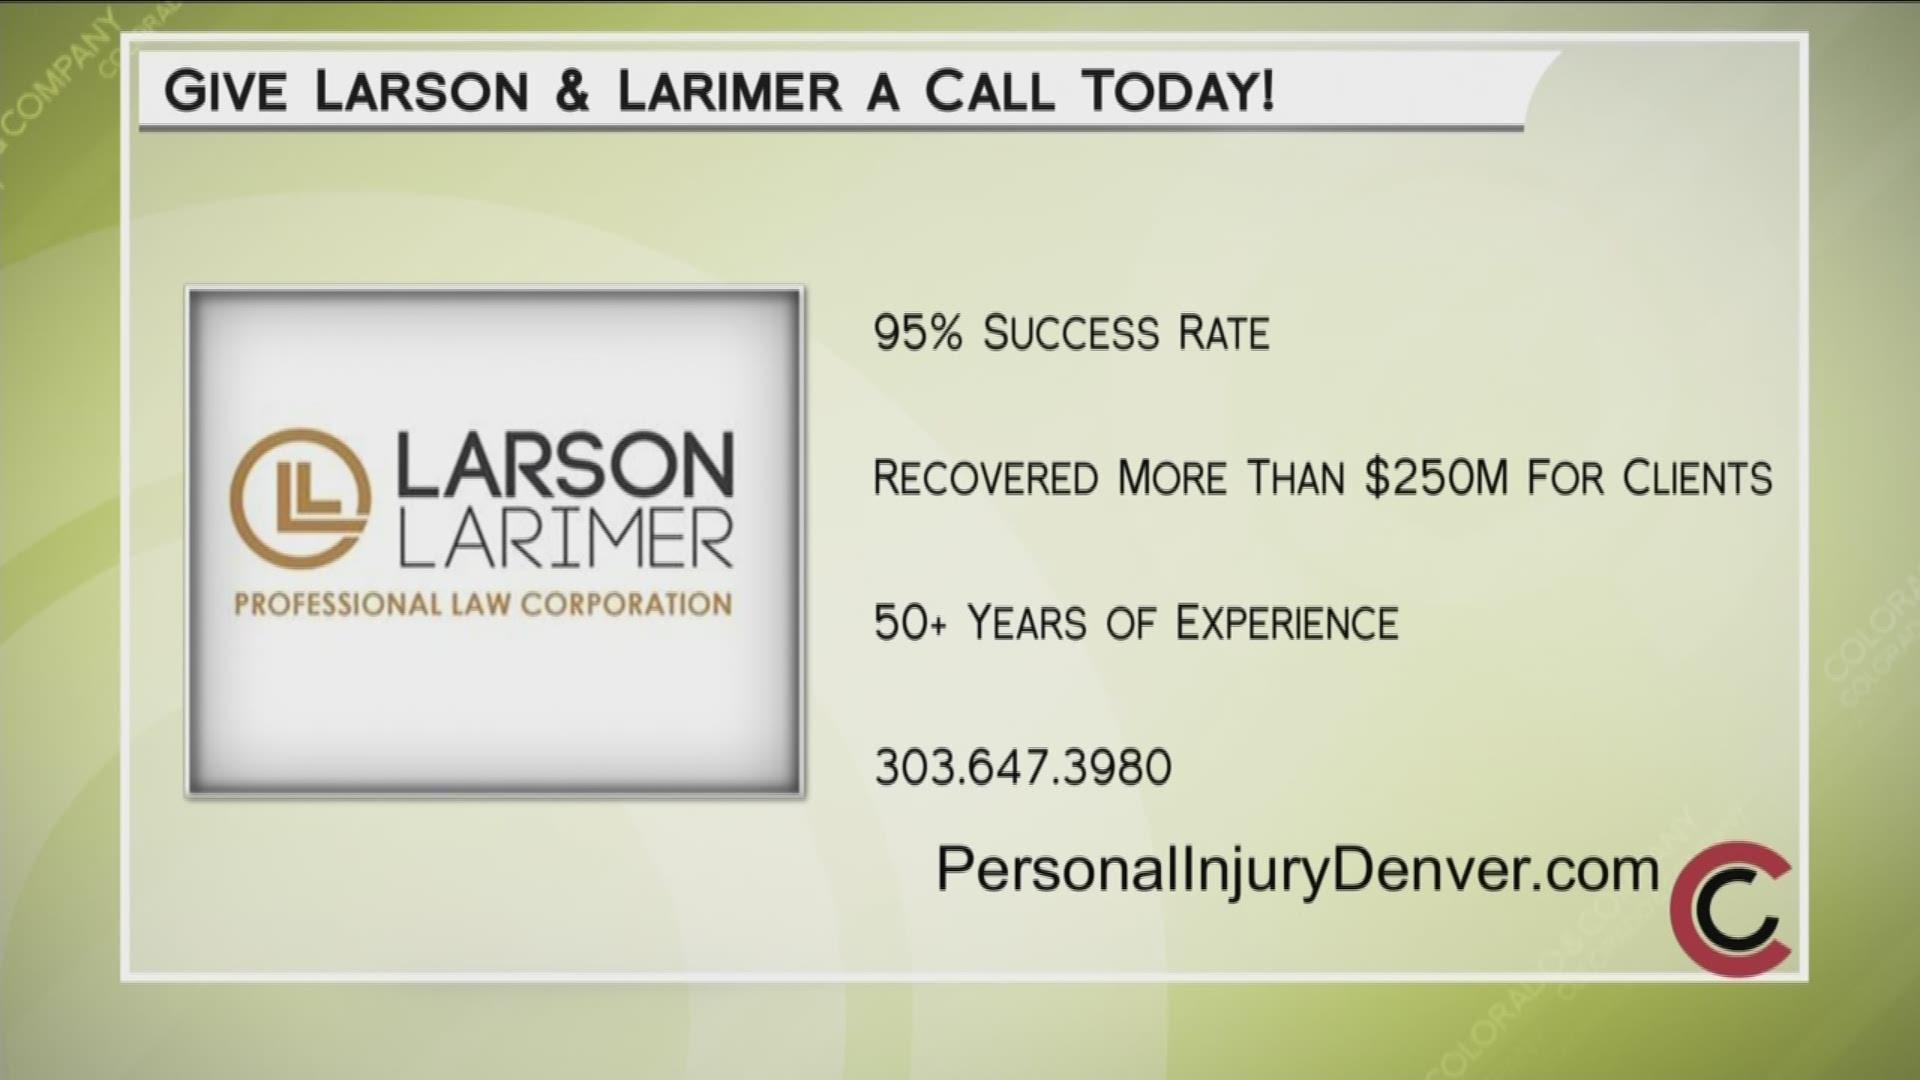 The firm of Larson and Larimer offers a personal approach and gets professional results. They handle a wide variety of personal injury claims. They have more than 50 years of experience and a 95% success rate, and have recovered more than $250 million for their clients. Call them today to see if they can help you—303.647.3980, or online at www.PersonalInjuryDenver.com. 
THIS INTERVIEW HAS COMMERCIAL CONTENT. PRODUCTS AND SERVICES FEATURED APPEAR AS PAID ADVERTISING.